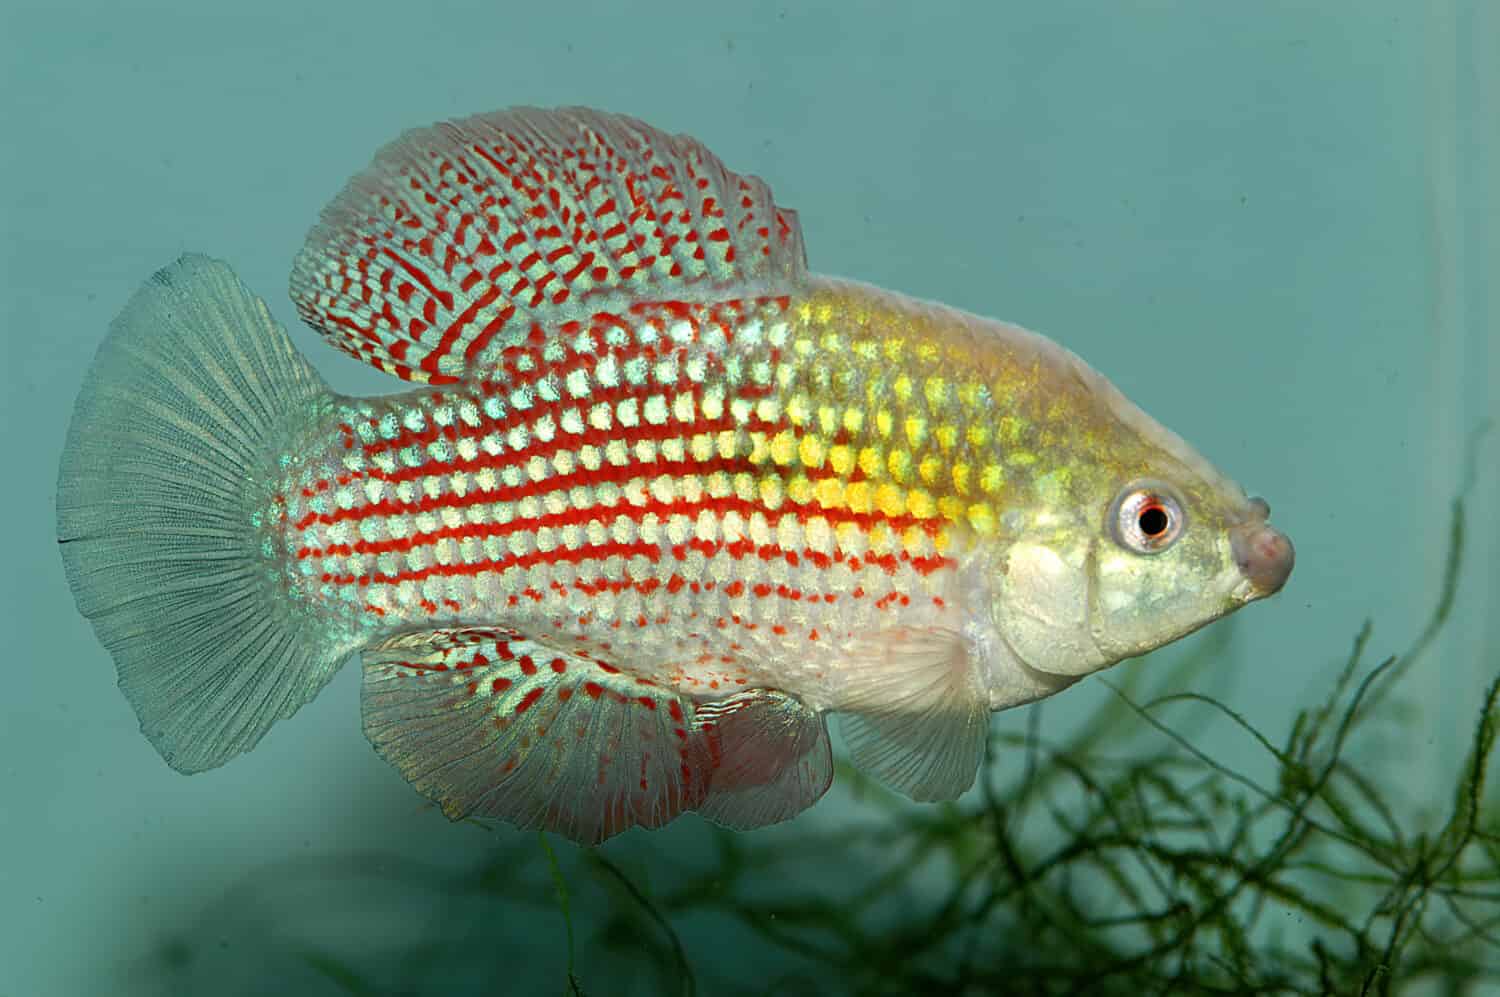 Aquarium fish. The flagfish or American flagfish (Jordanella floridae) is a pupfish native to Florida. It received its name because the male fish resembles the American flag.  